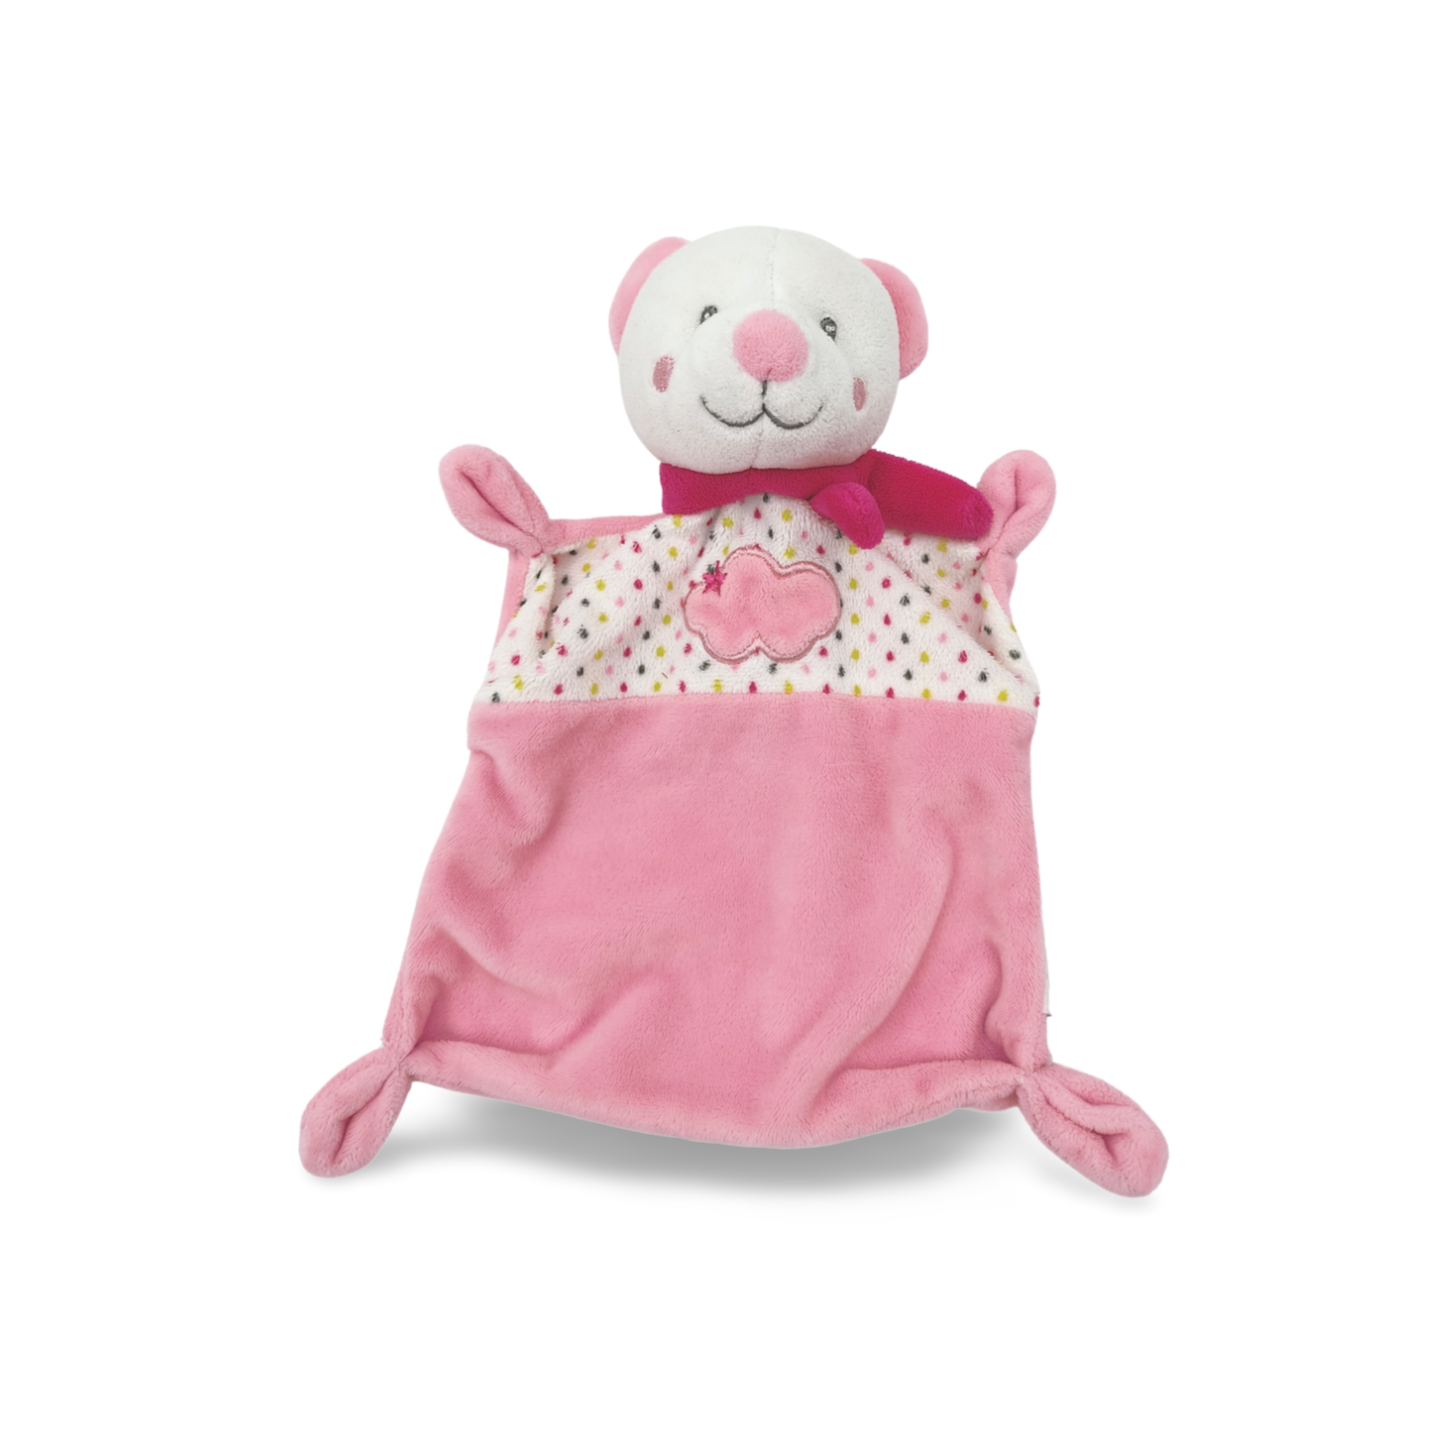 Doudou plat rose ours (1)